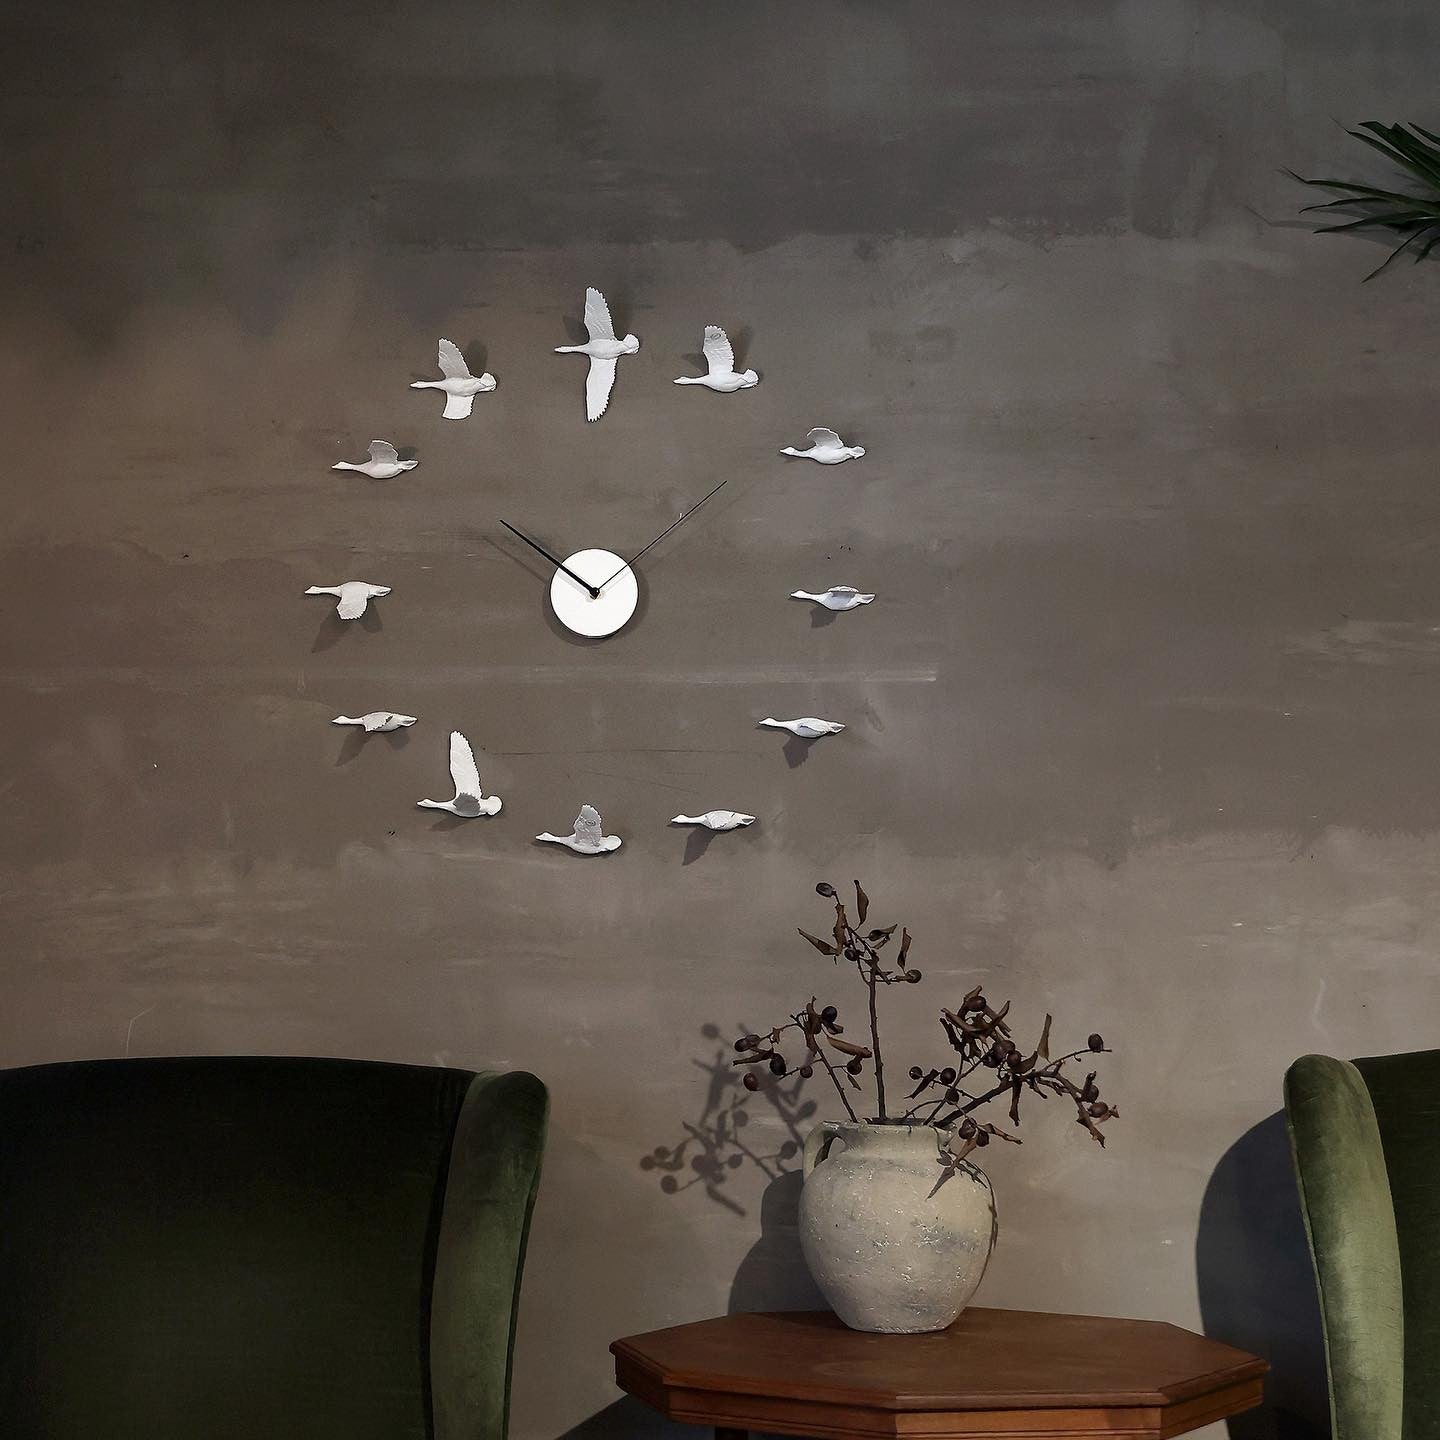 Bird Wall Clock: It in the sky and home literally represent freedom